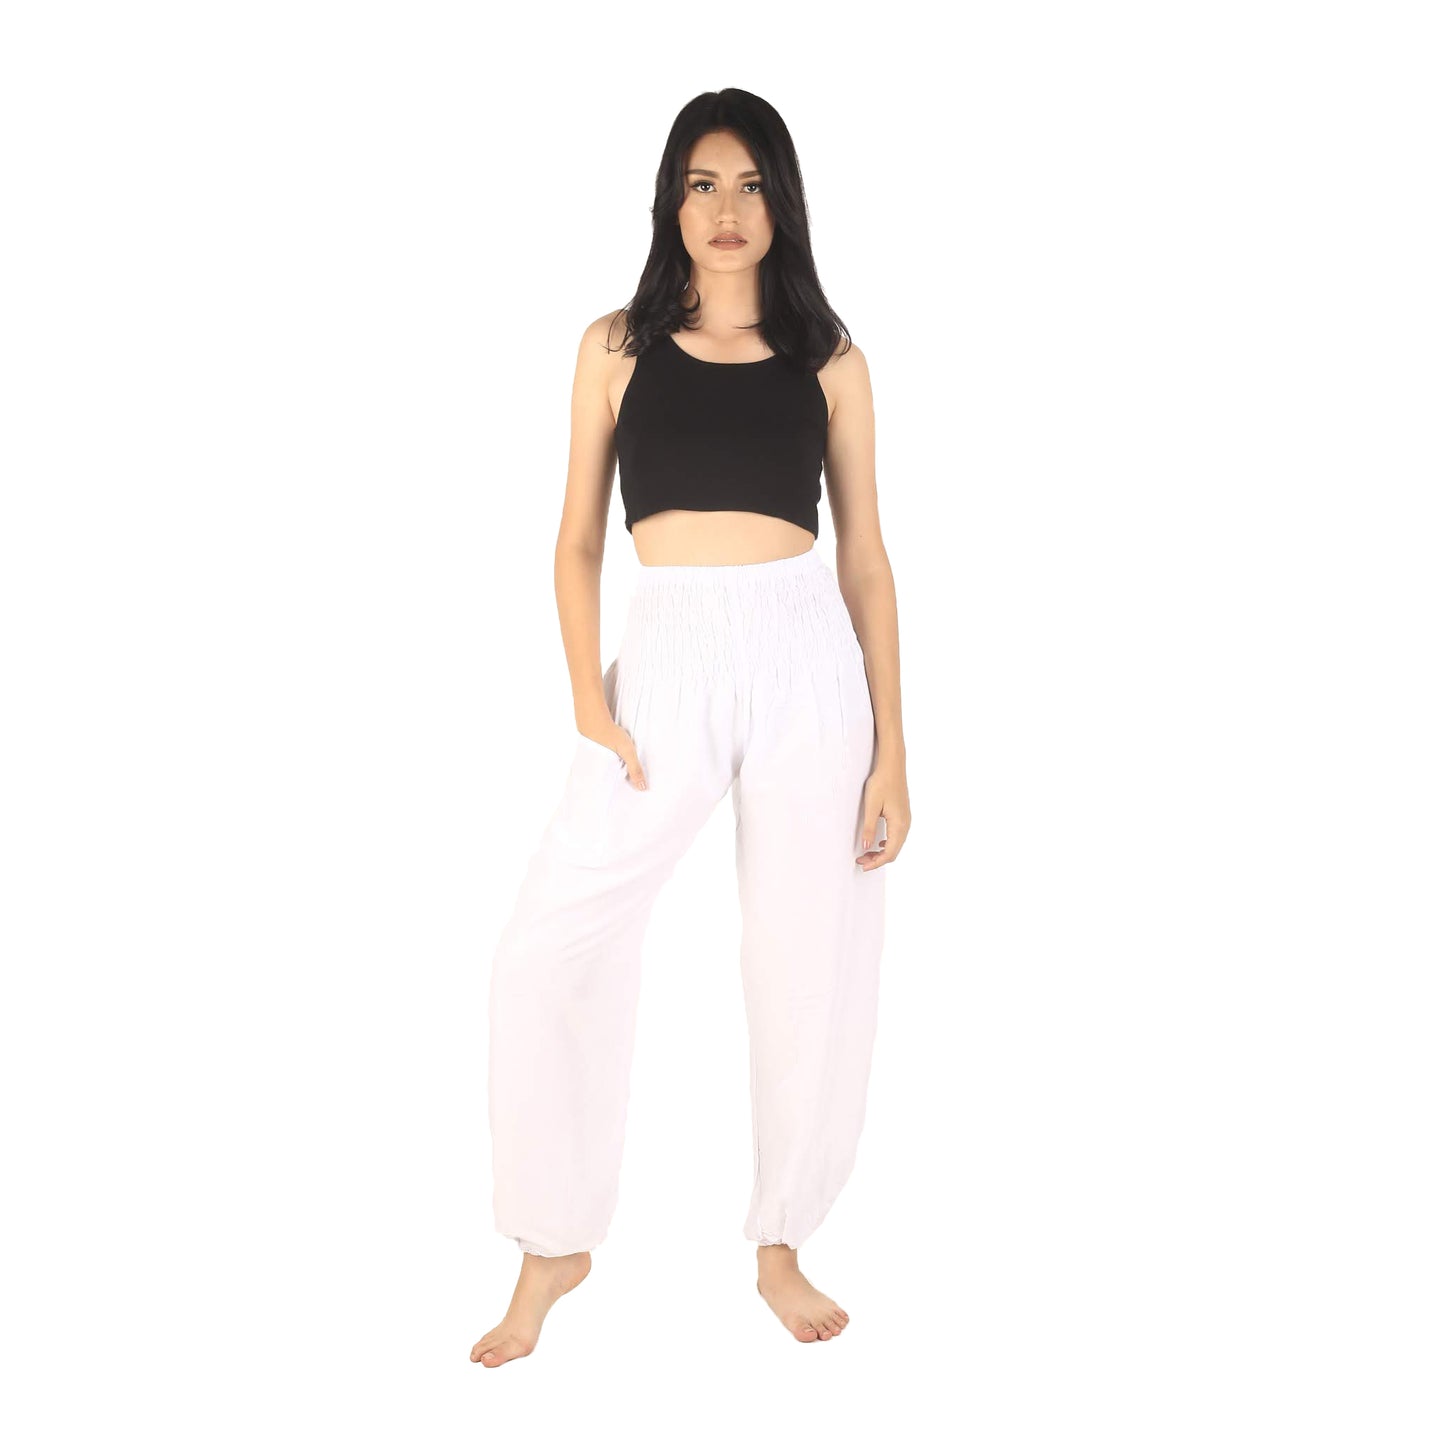 Solid color women harem pants in White PP0004 020000 04